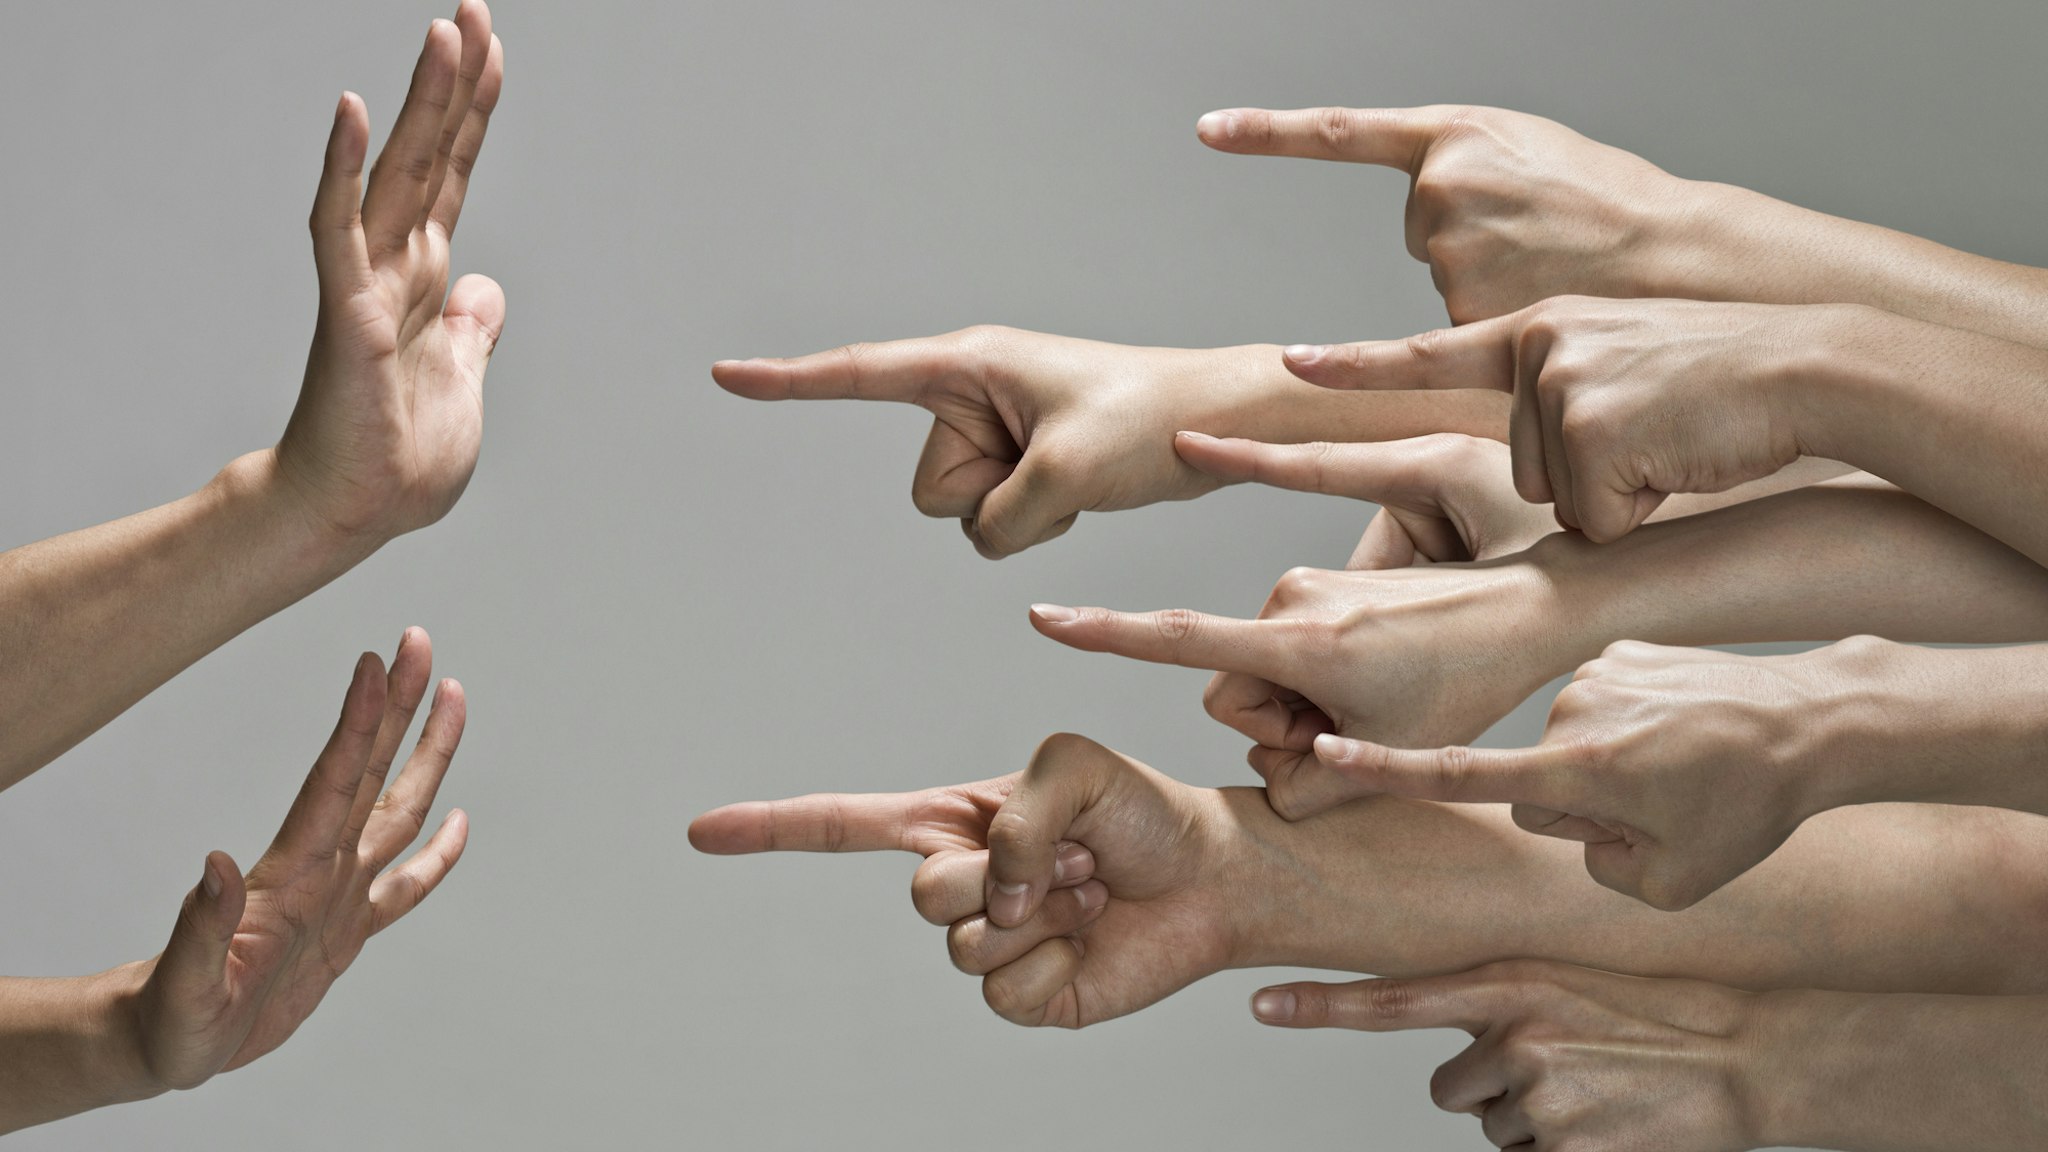 Multiple white hands are pointing index fingers from the right to the left at one set of hands. The pair of hands that are being pointed at are up in a defensive pose, with fingers to the sky and palms towards the pointing fingers.